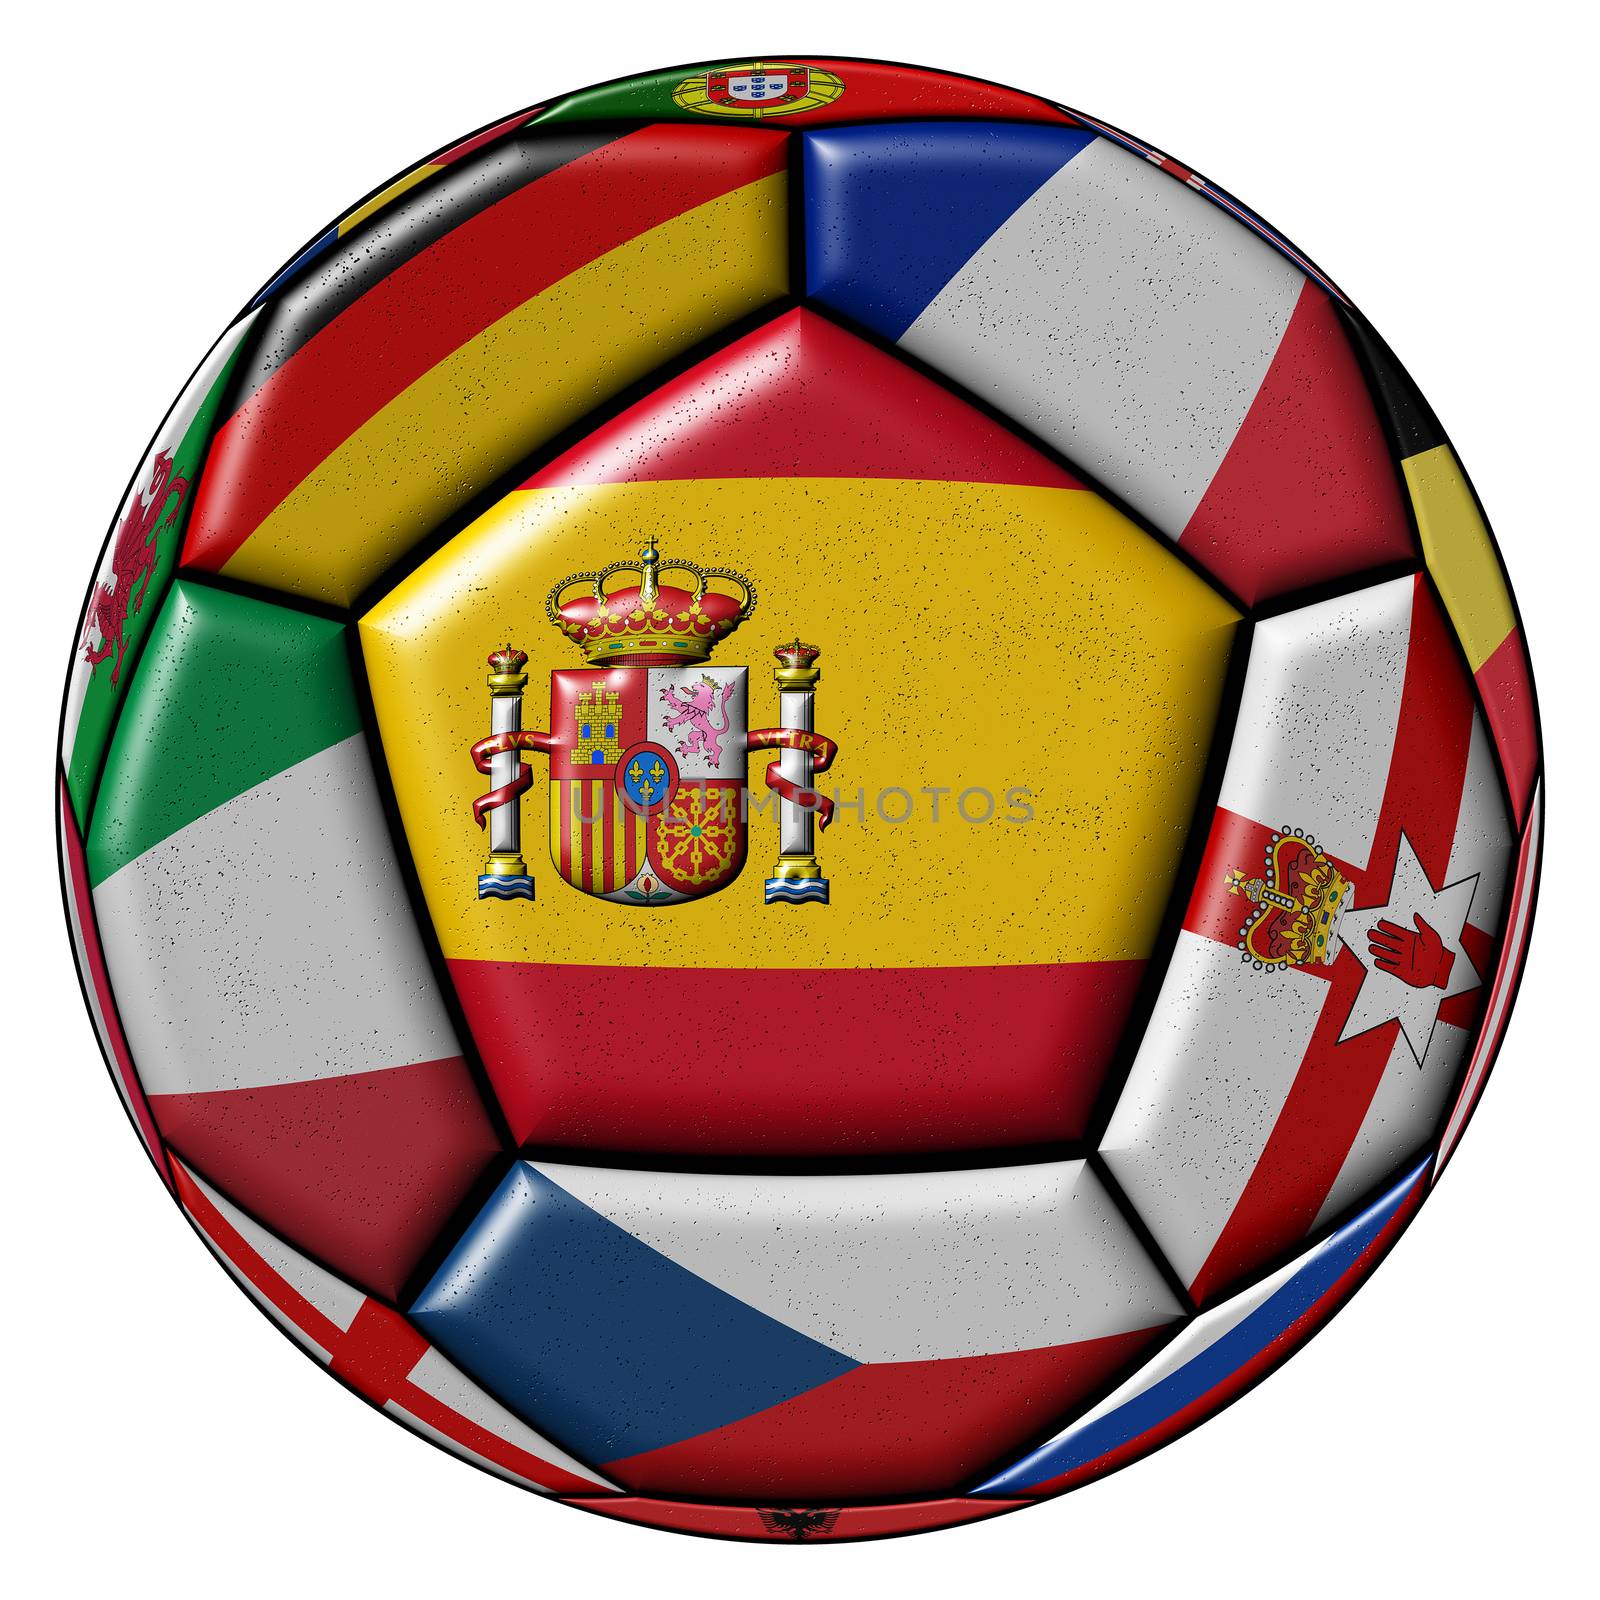 Soccer ball on a white background with flags of European countries - flag of Spain in the center